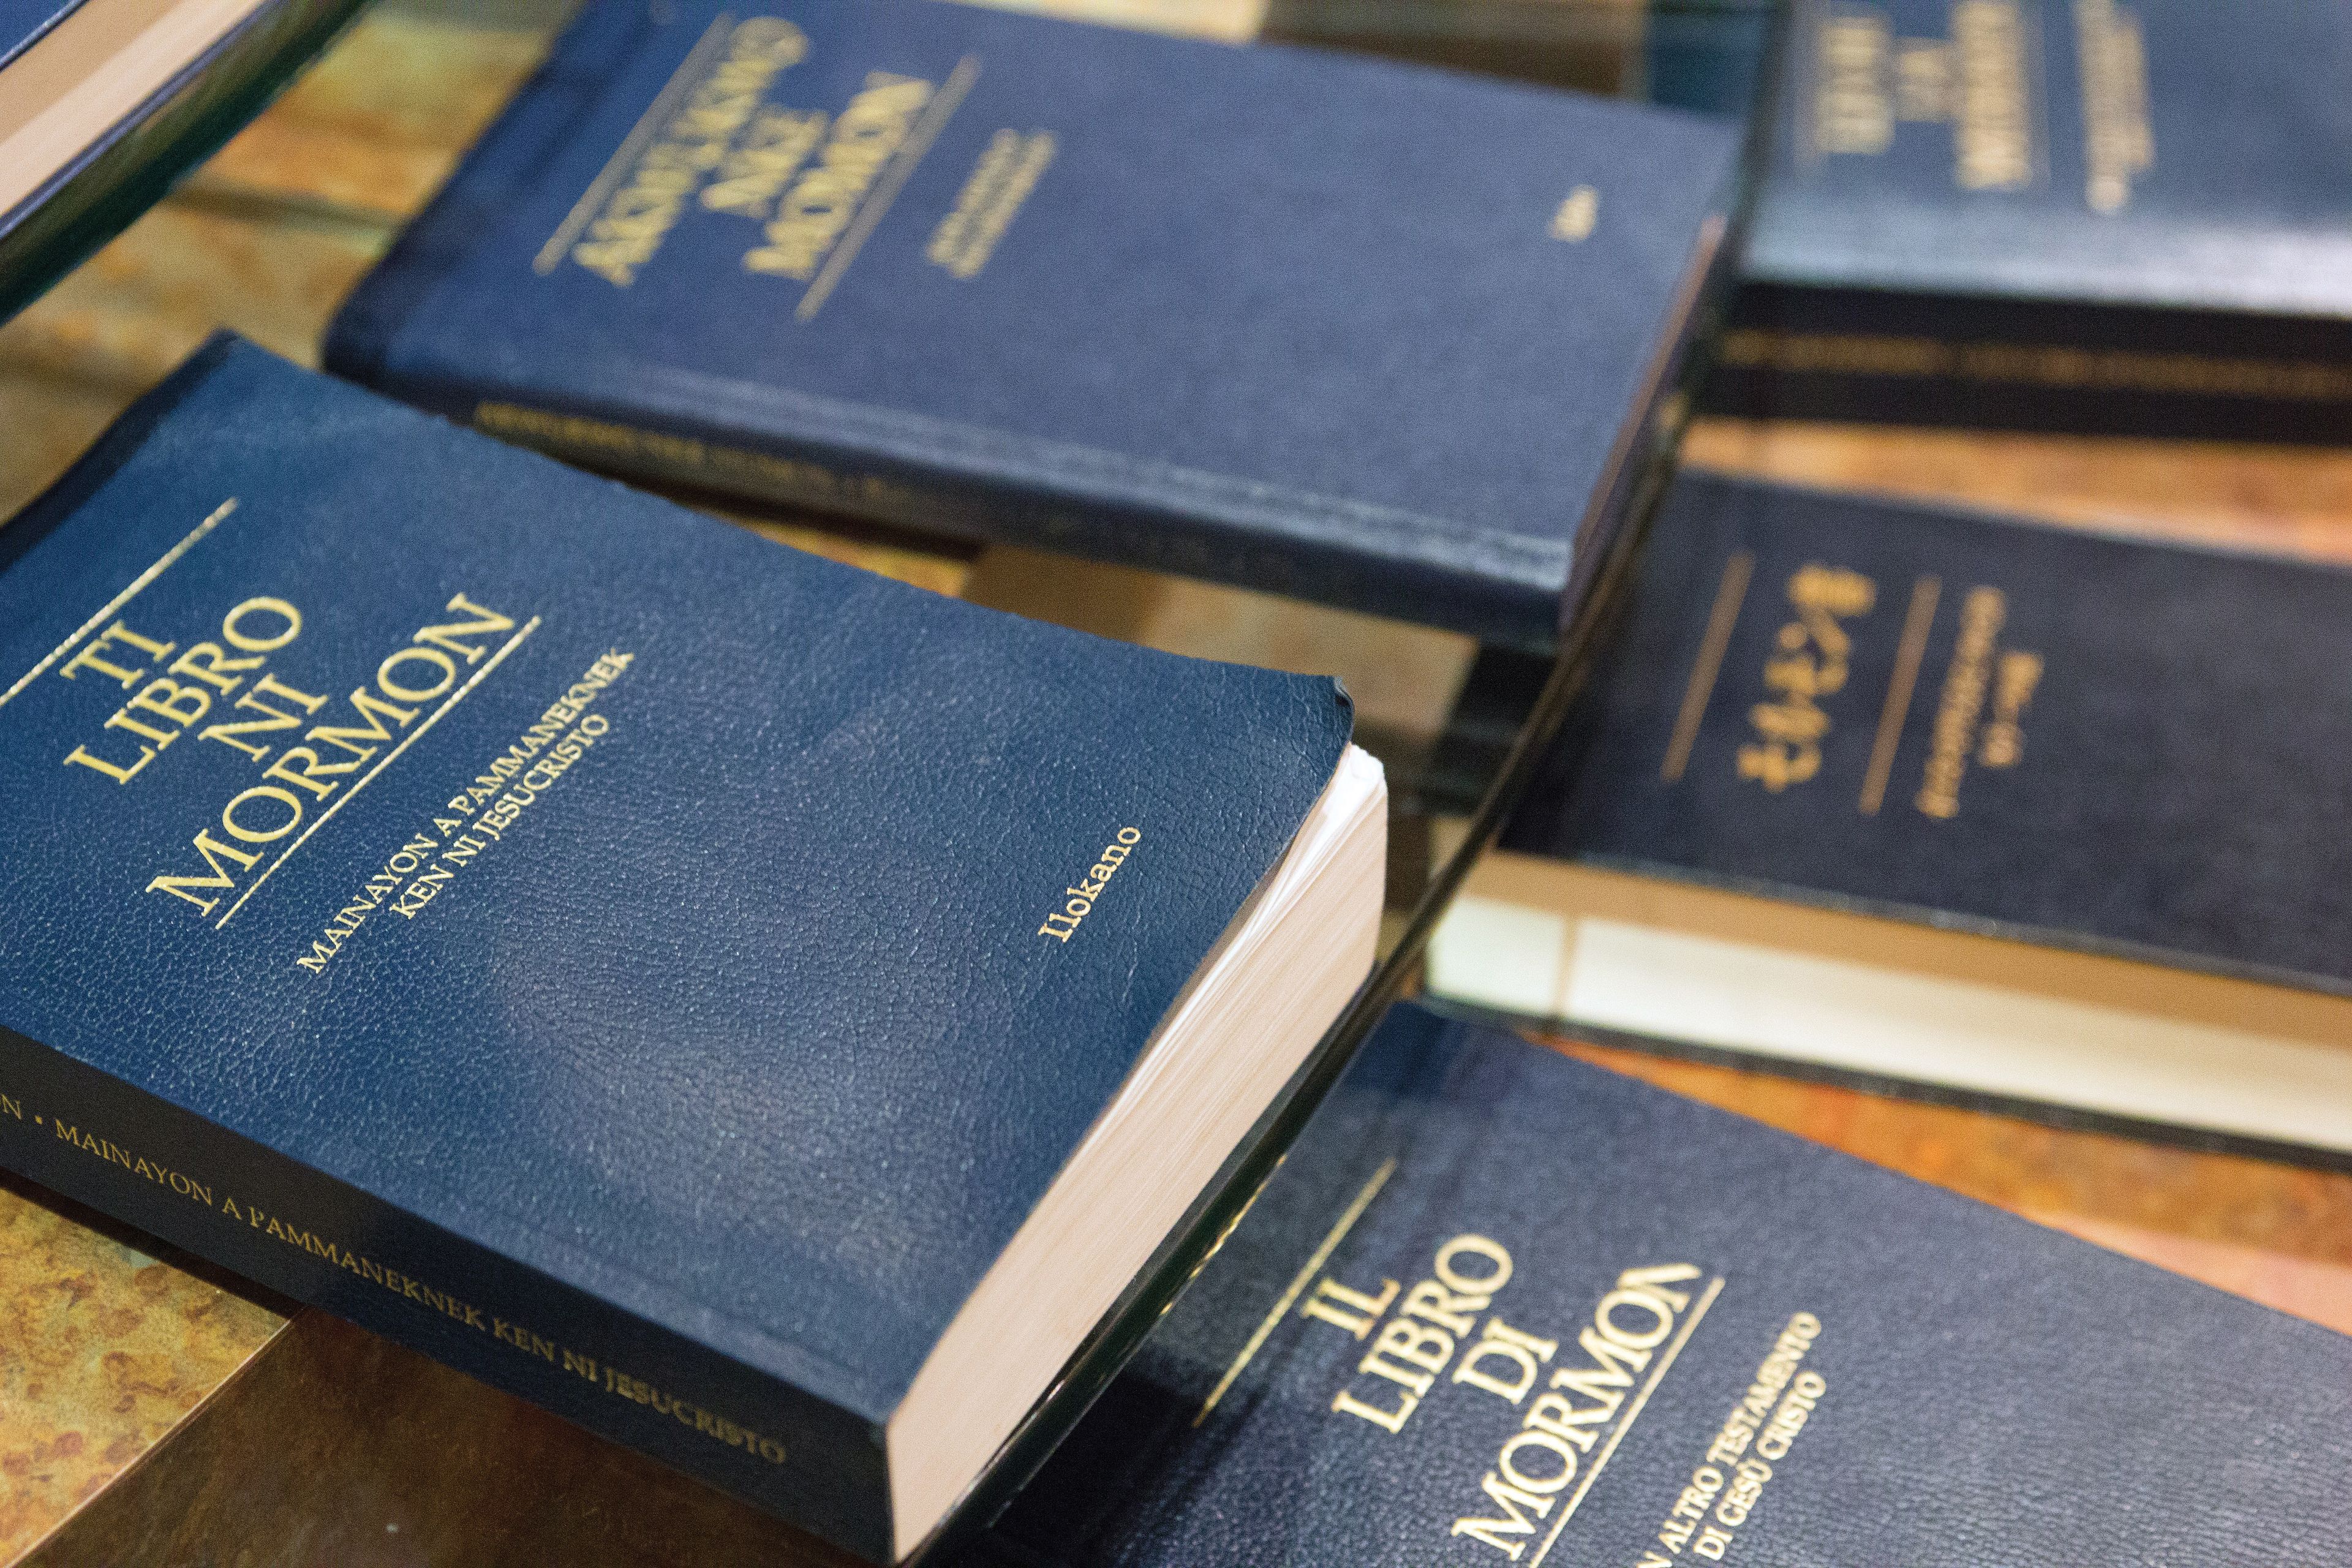 Copies of the Book of Mormon in a variety of languages at the Independence Visitors’ Center in Missouri.